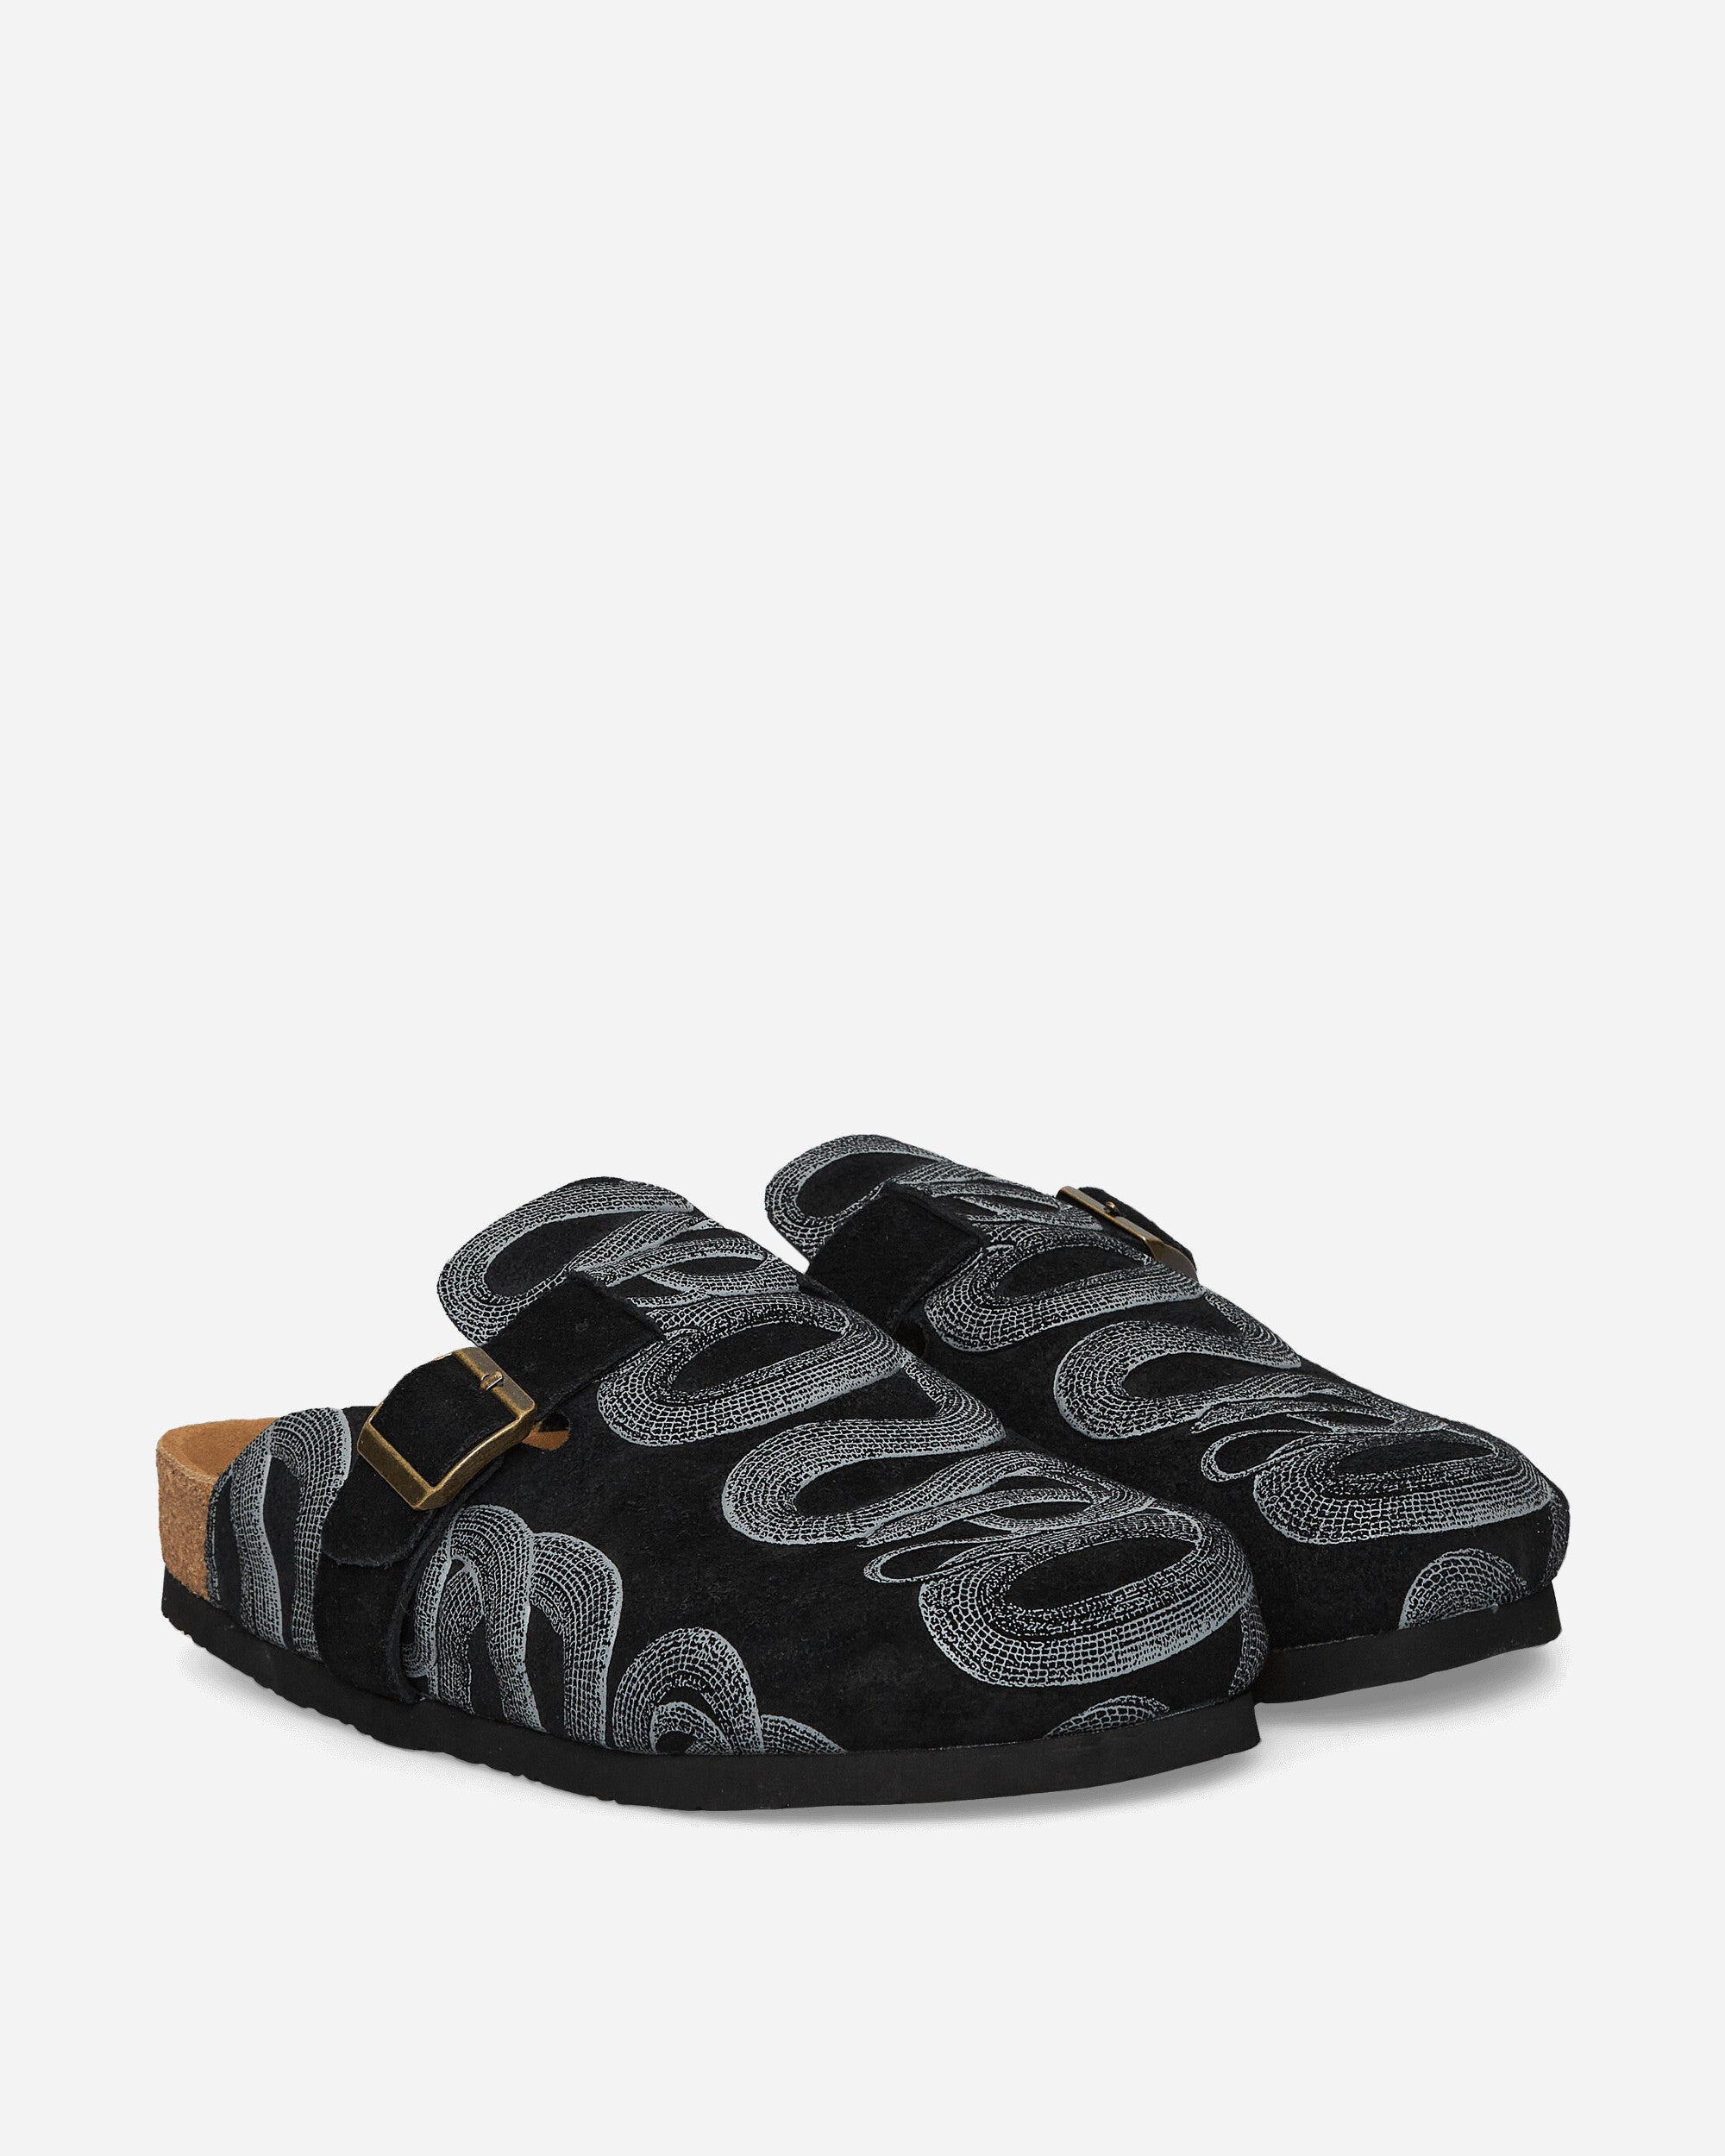 Hysteric Glamour Snake Loop Sandals Black Sandals and Slides Sandals and Mules 02241QS01 C1